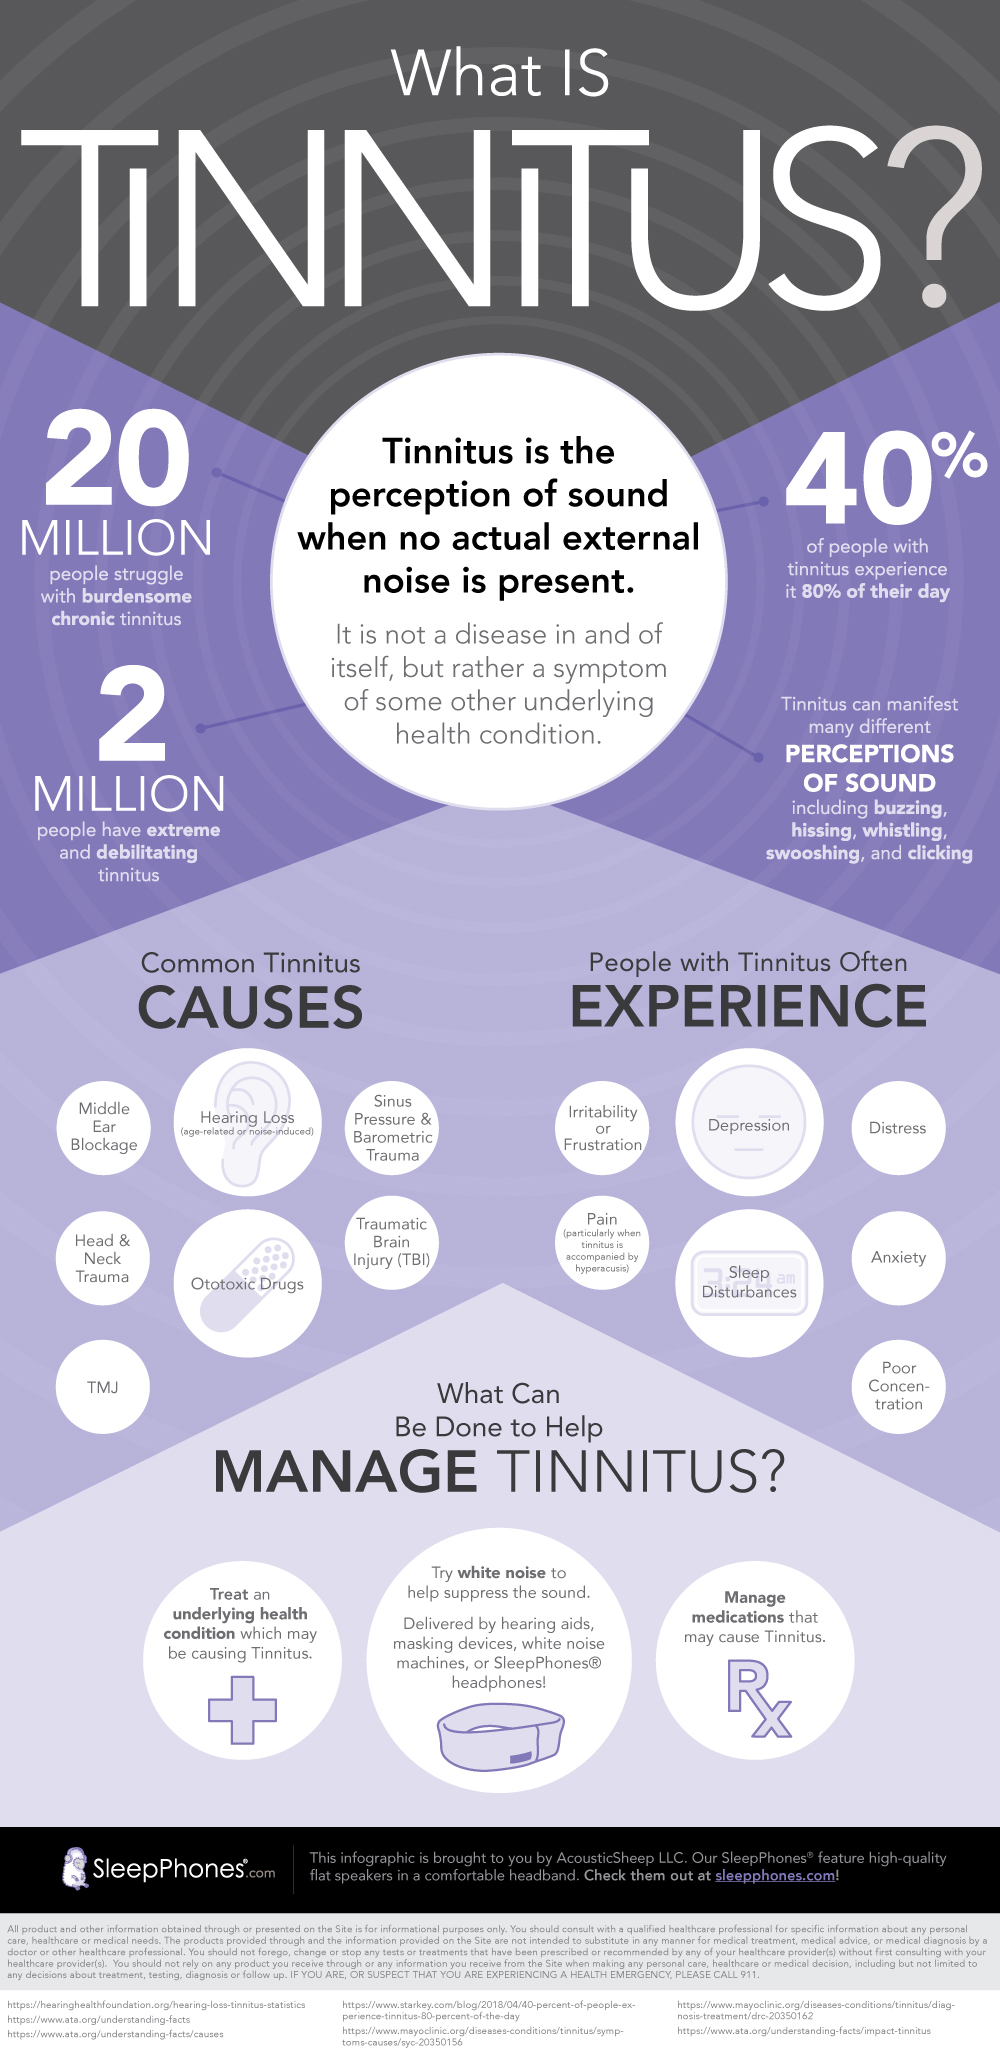 Tinnitus Infographic, Tinnitus is the perception of sound when no actual external noise is present. It is not a disease in and of itself, but rather a symptom of some other underlying health condition. Common causes of tinnitus are middle ear blockage, hearing loss, sinus pressure, head and neck trauma, and traumatic brain injury. People with tinnitus often experience depression, anxiety, sleep disturbances, distress, pain, and irritability. What can be done to help manage tinnitus? Treat an underlying health condition, try white noise to help mask the sound, manage medications that may cause tinnitus. SleepPhones comfortable sleep headphones are headphones that can be used to mask tinnitus or fall asleep with tinnitus.